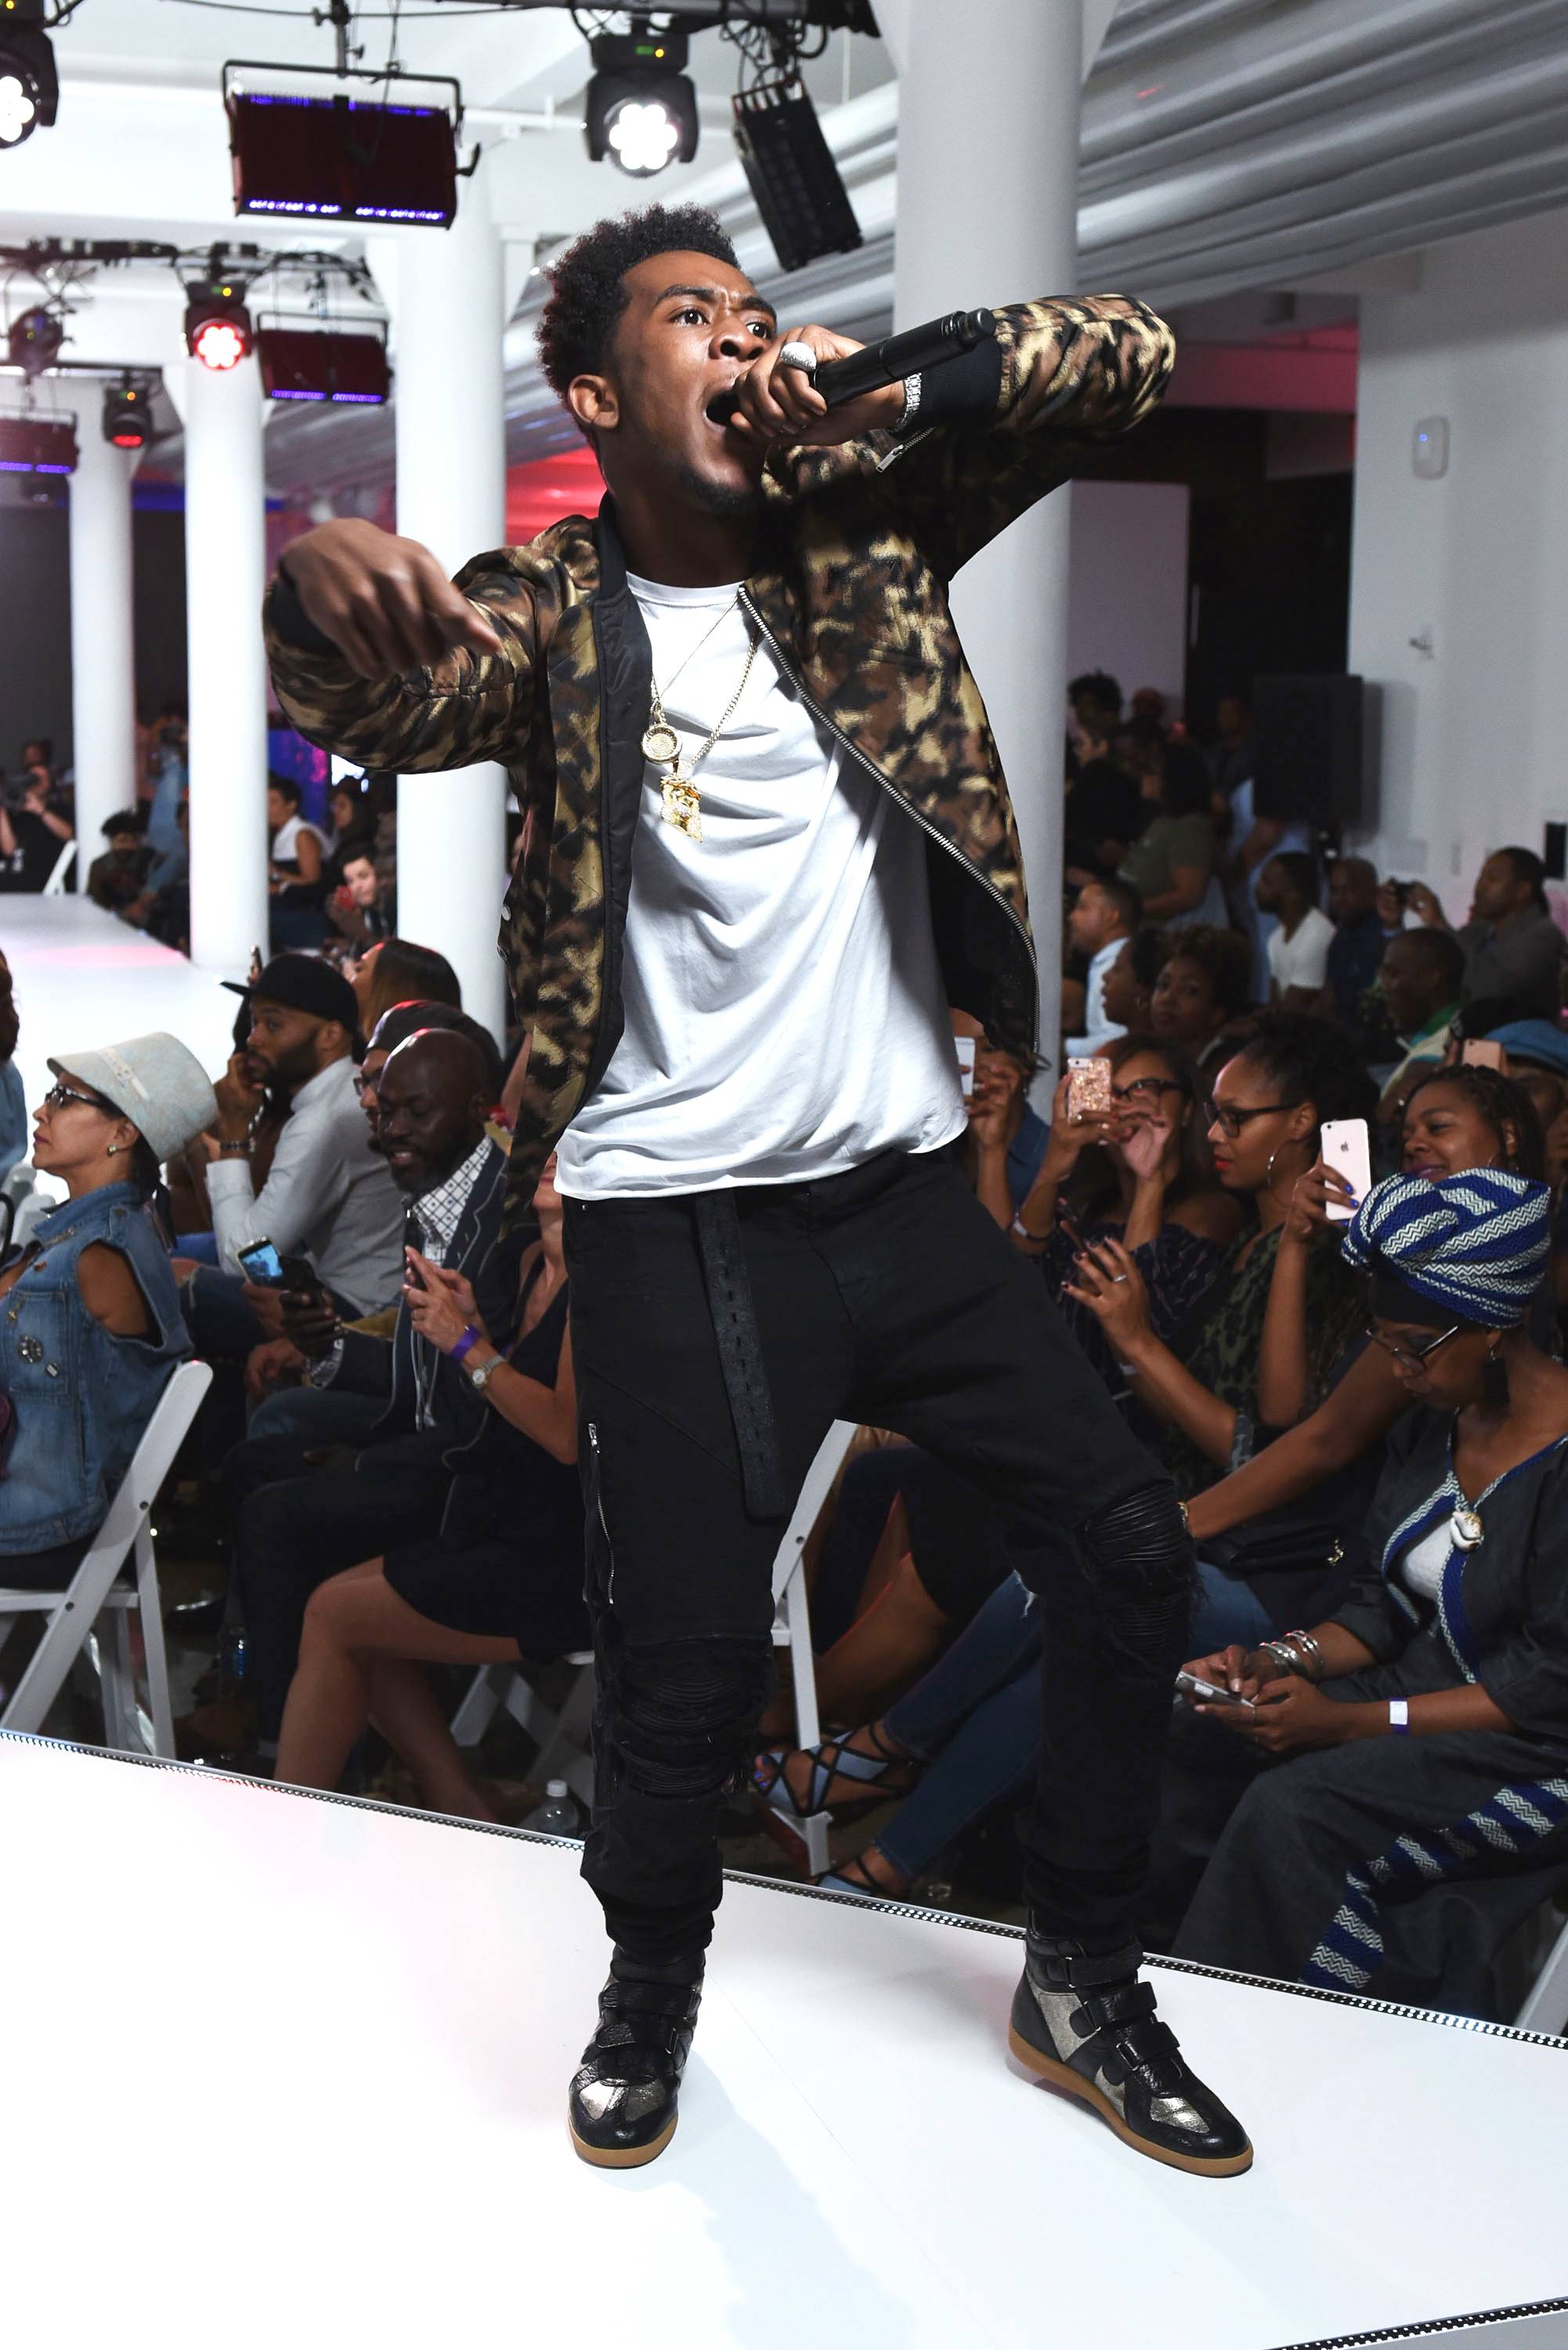 Burrrdat!&nbsp; - Desiigner takes the How to Rock stage with his signature megawatt energy.(Photo: Noam Galai/Getty Images for BET Networks)&nbsp;